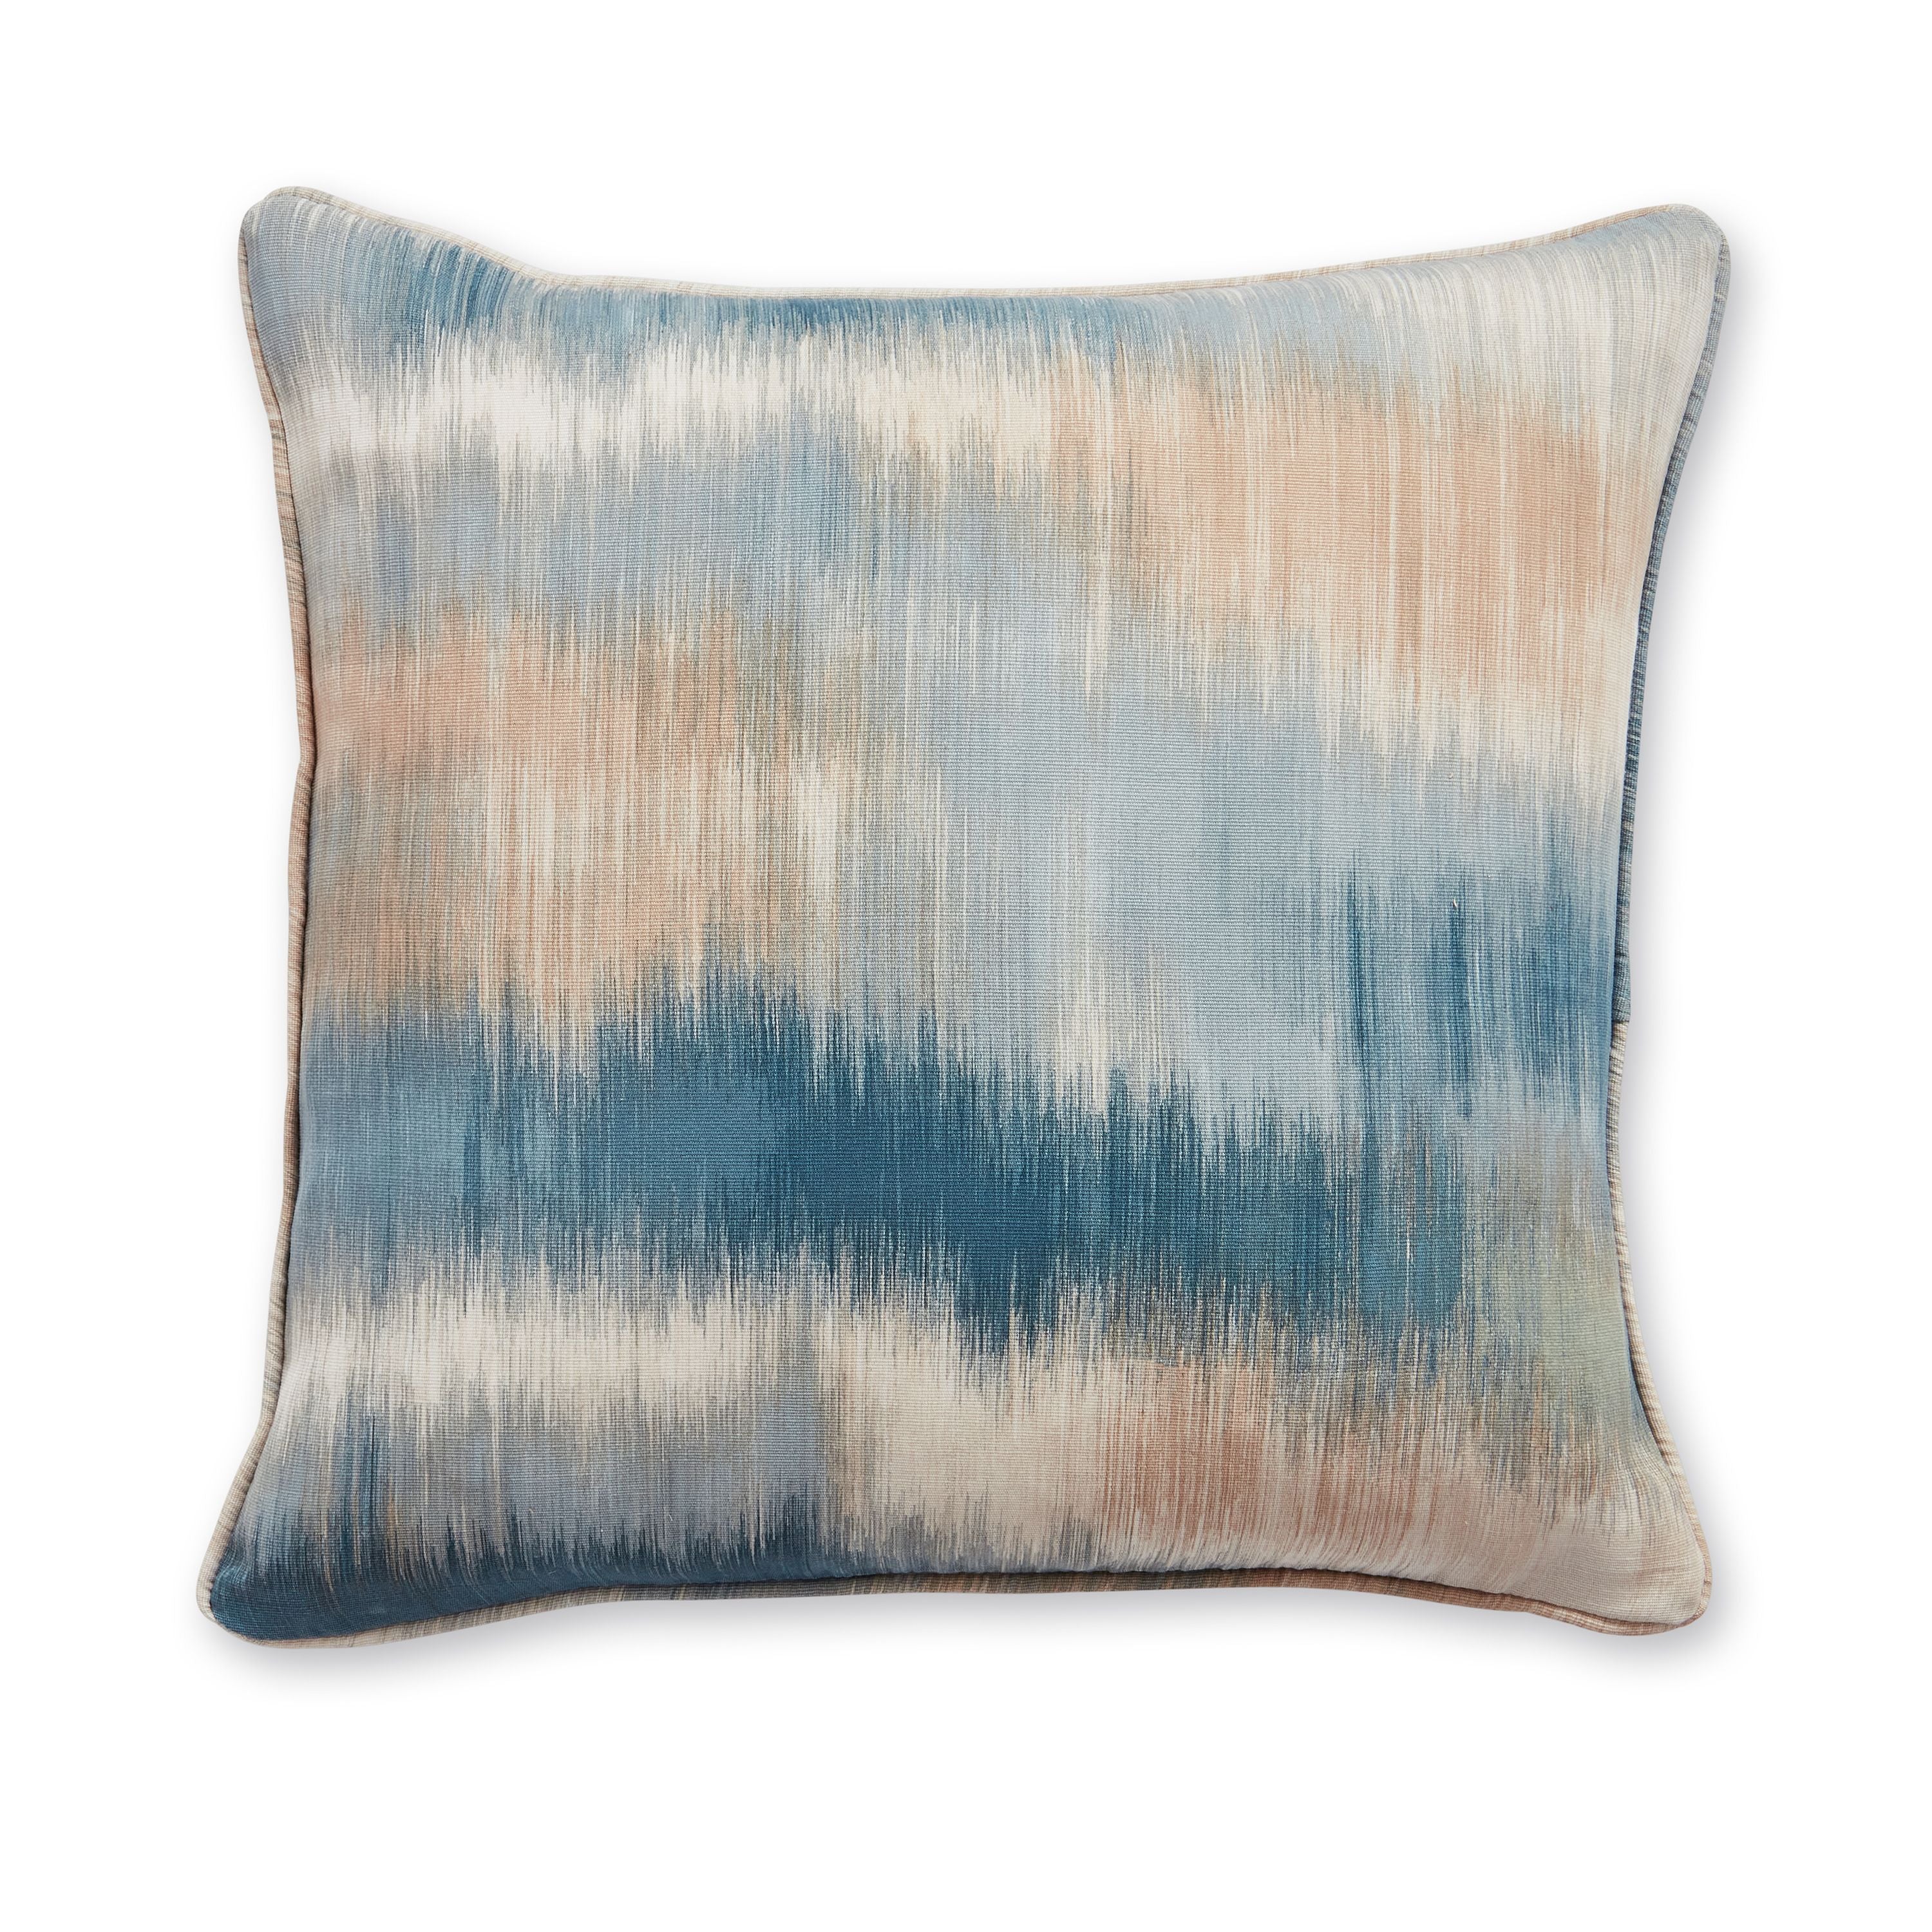 Ombre Texture Filled Cushion, Teal